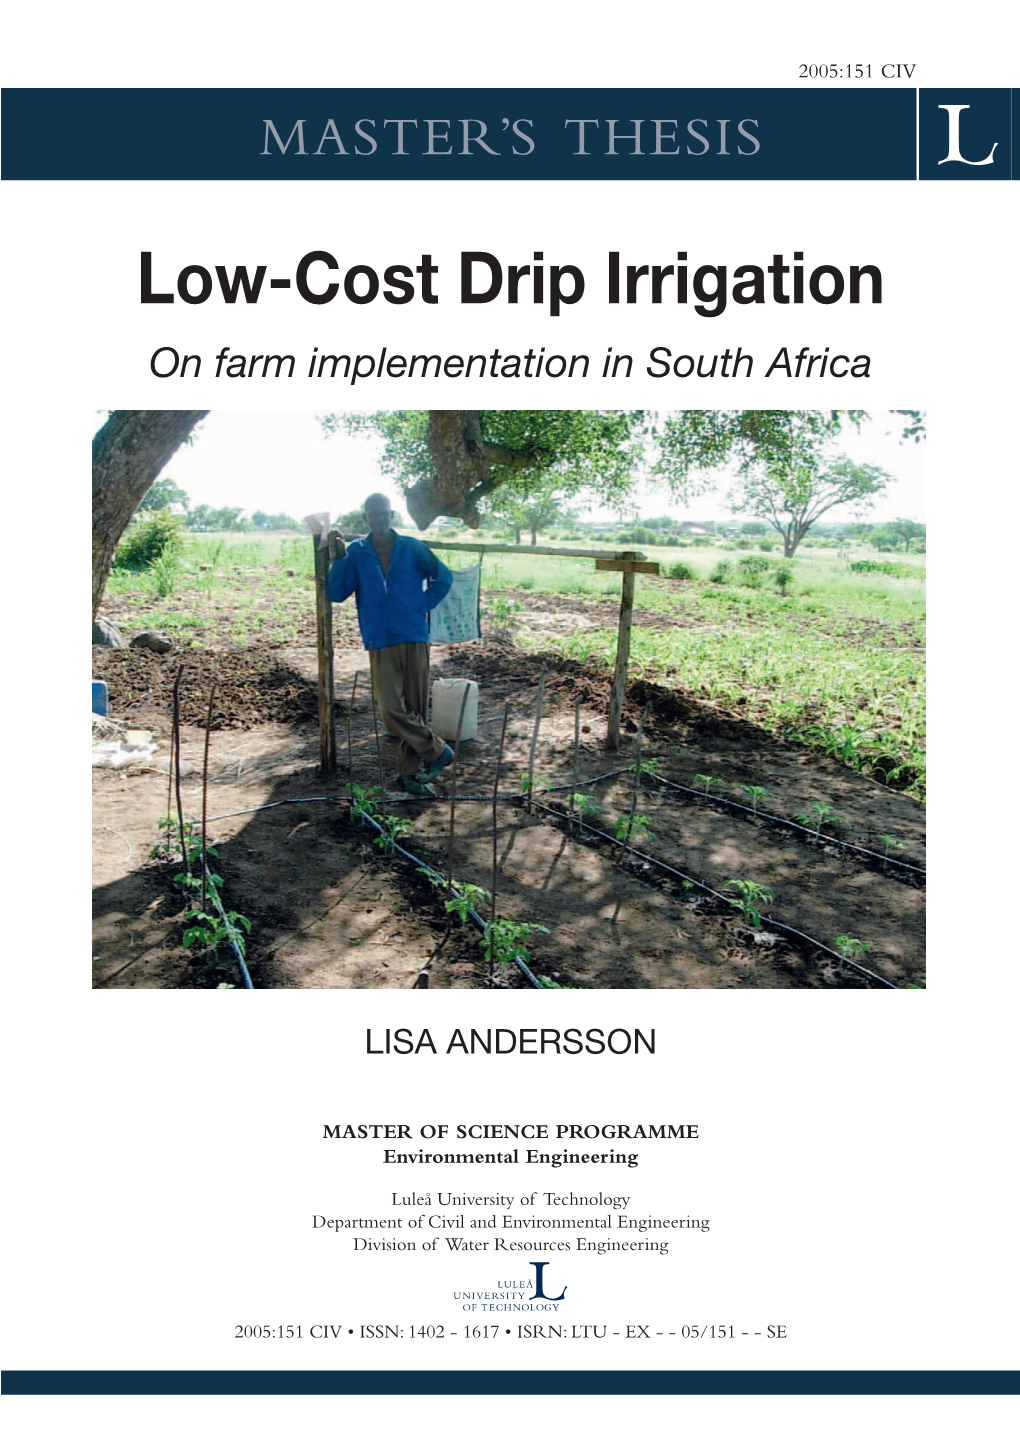 Low-Cost Drip Irrigation: on Farm Implementation in South Africa